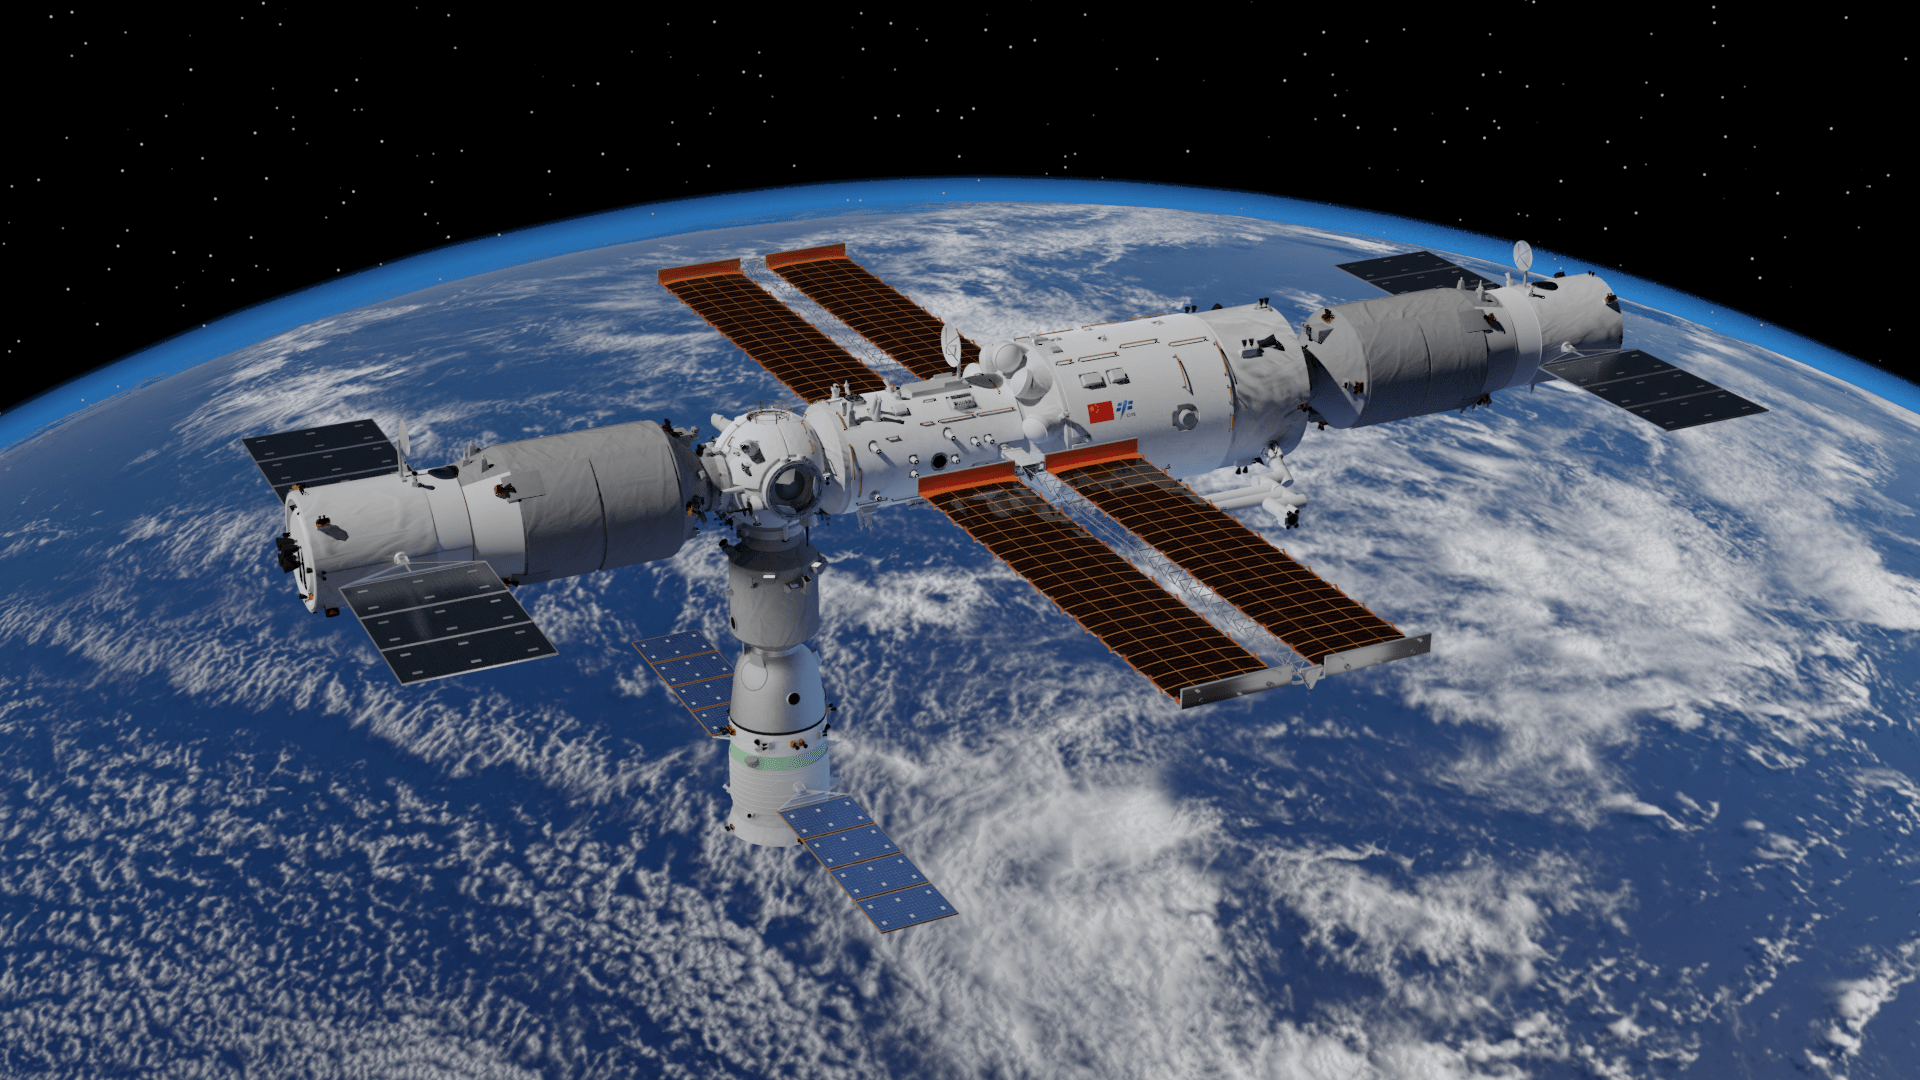 Tiangong Space Station Rendering 2021.10 min